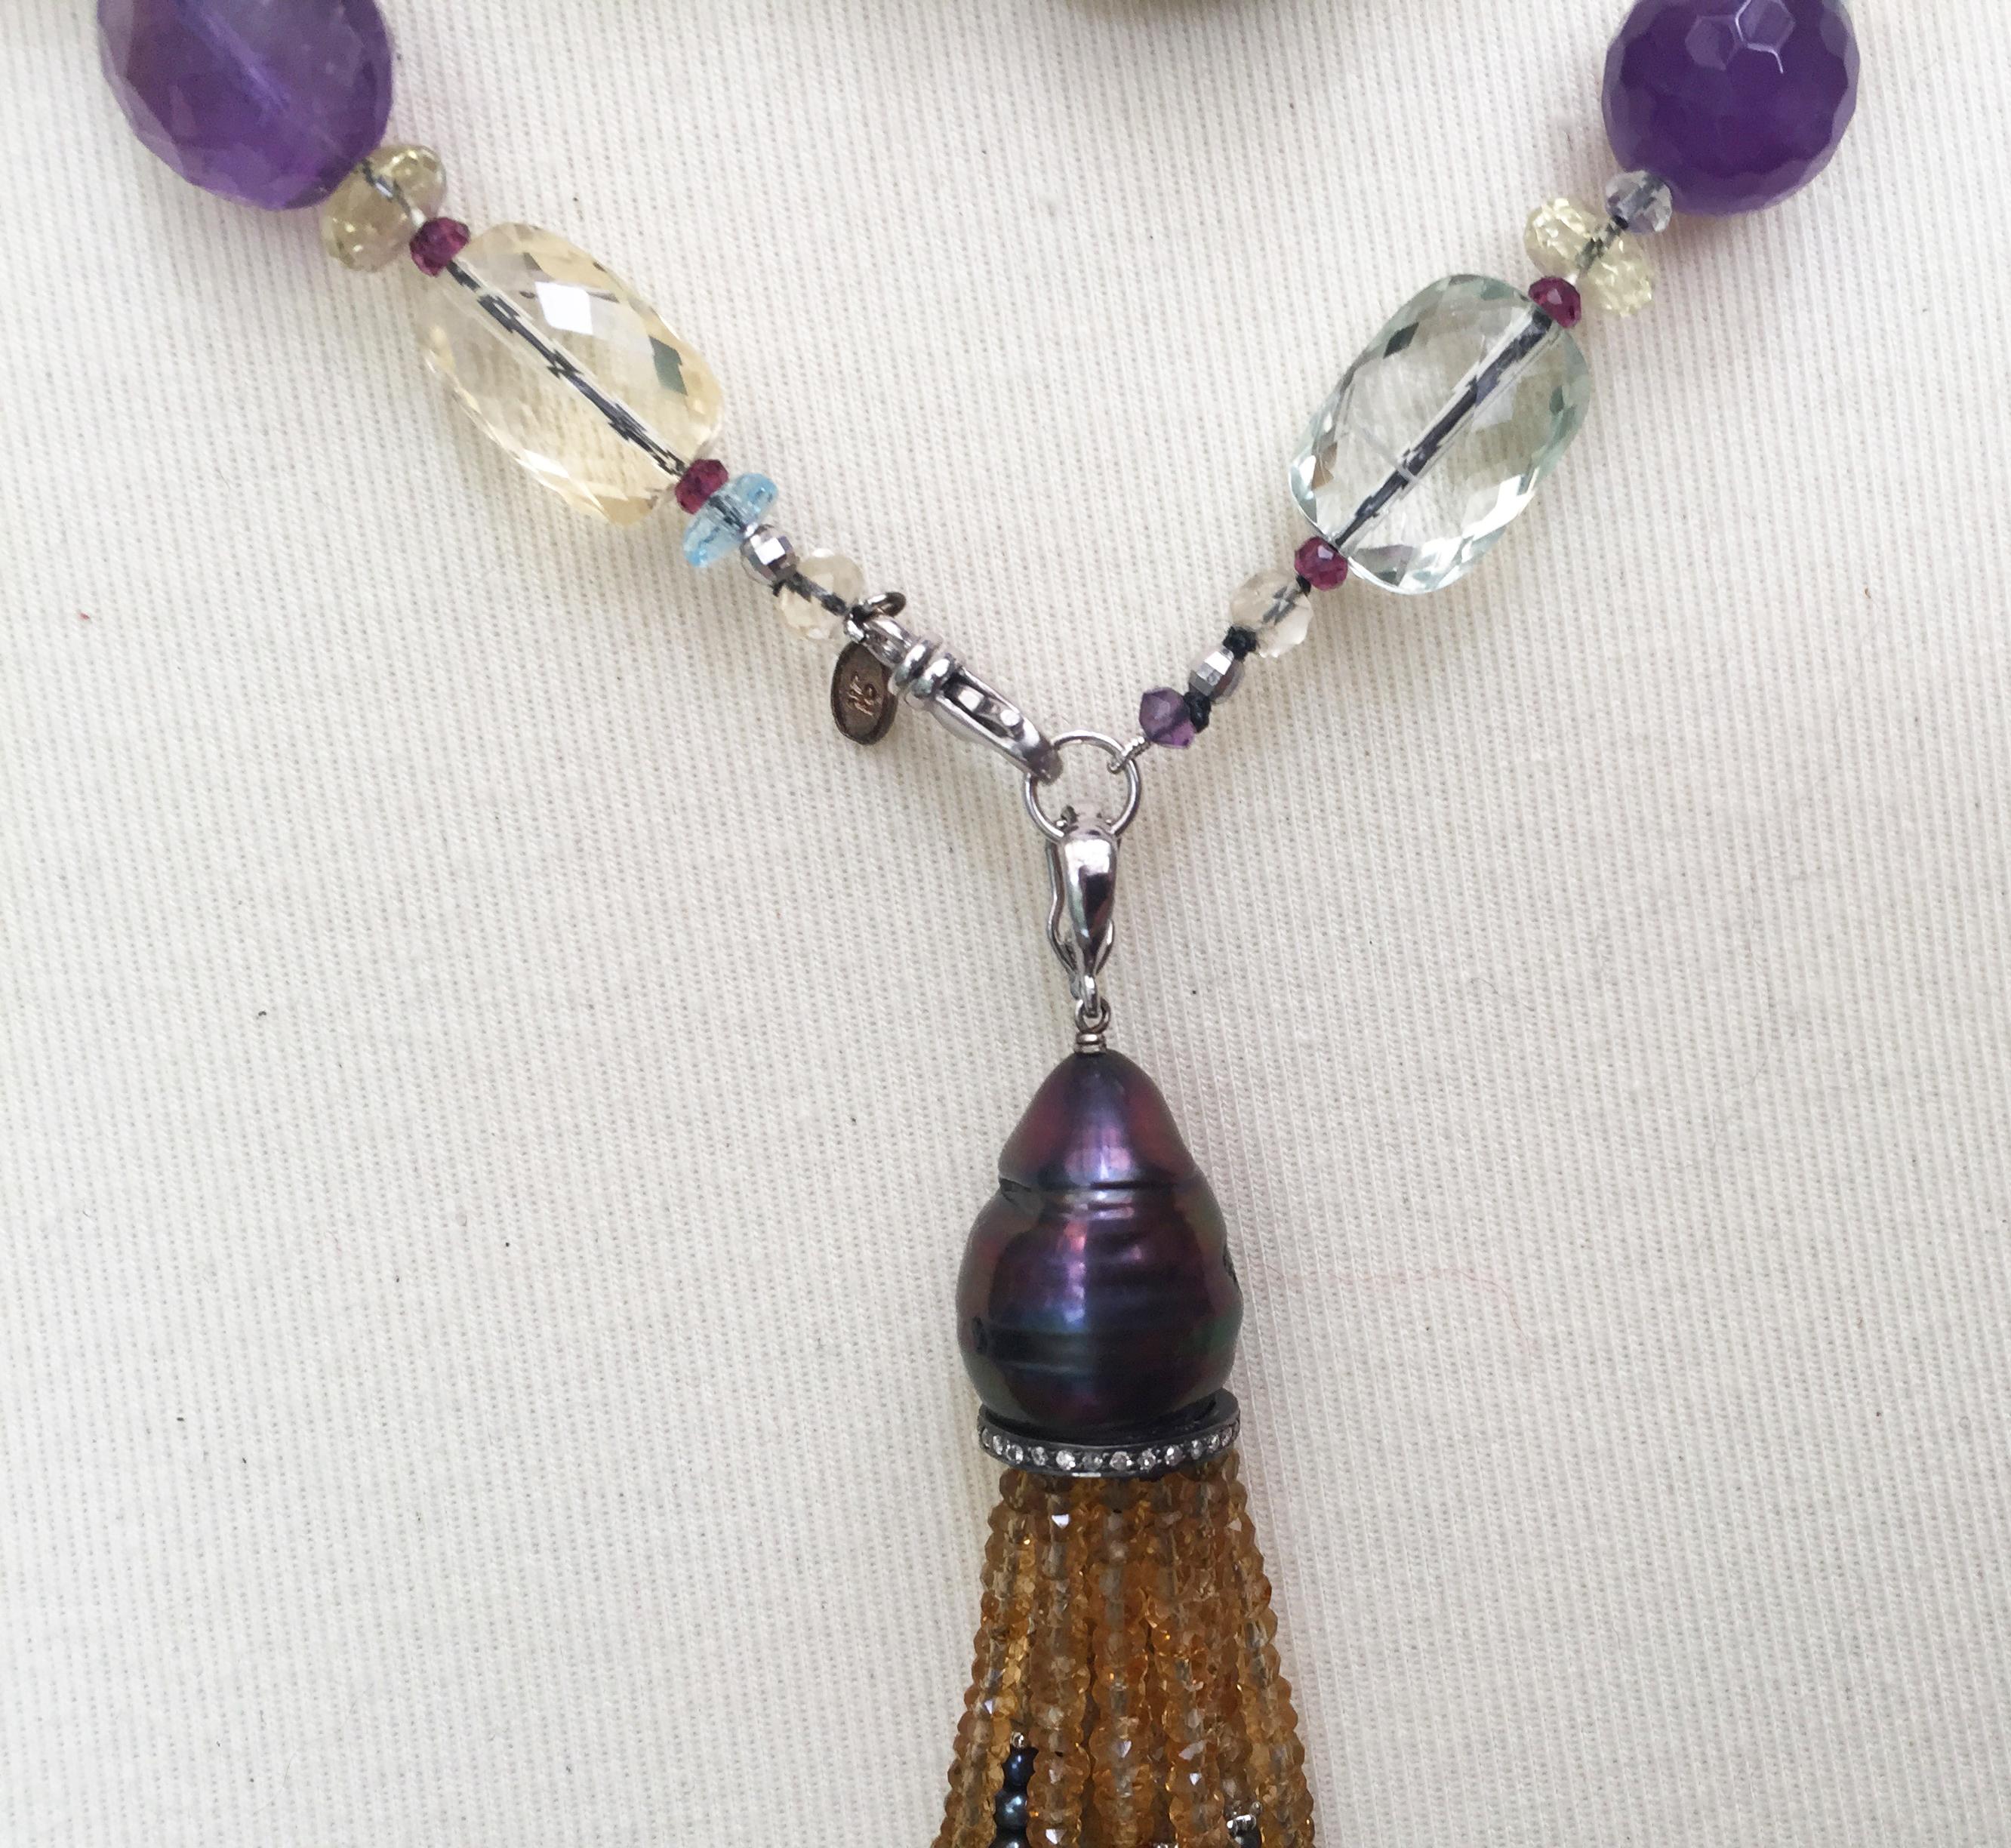 This black pearl and multi-color semi precious lariat  is highlighted with a 14k white gold clasp and beads. Marina J. hand selected the citrine, amethyst, green amethyst, aquamarine, garnet, and blue topaz, to create a colorful and elegant lariat.